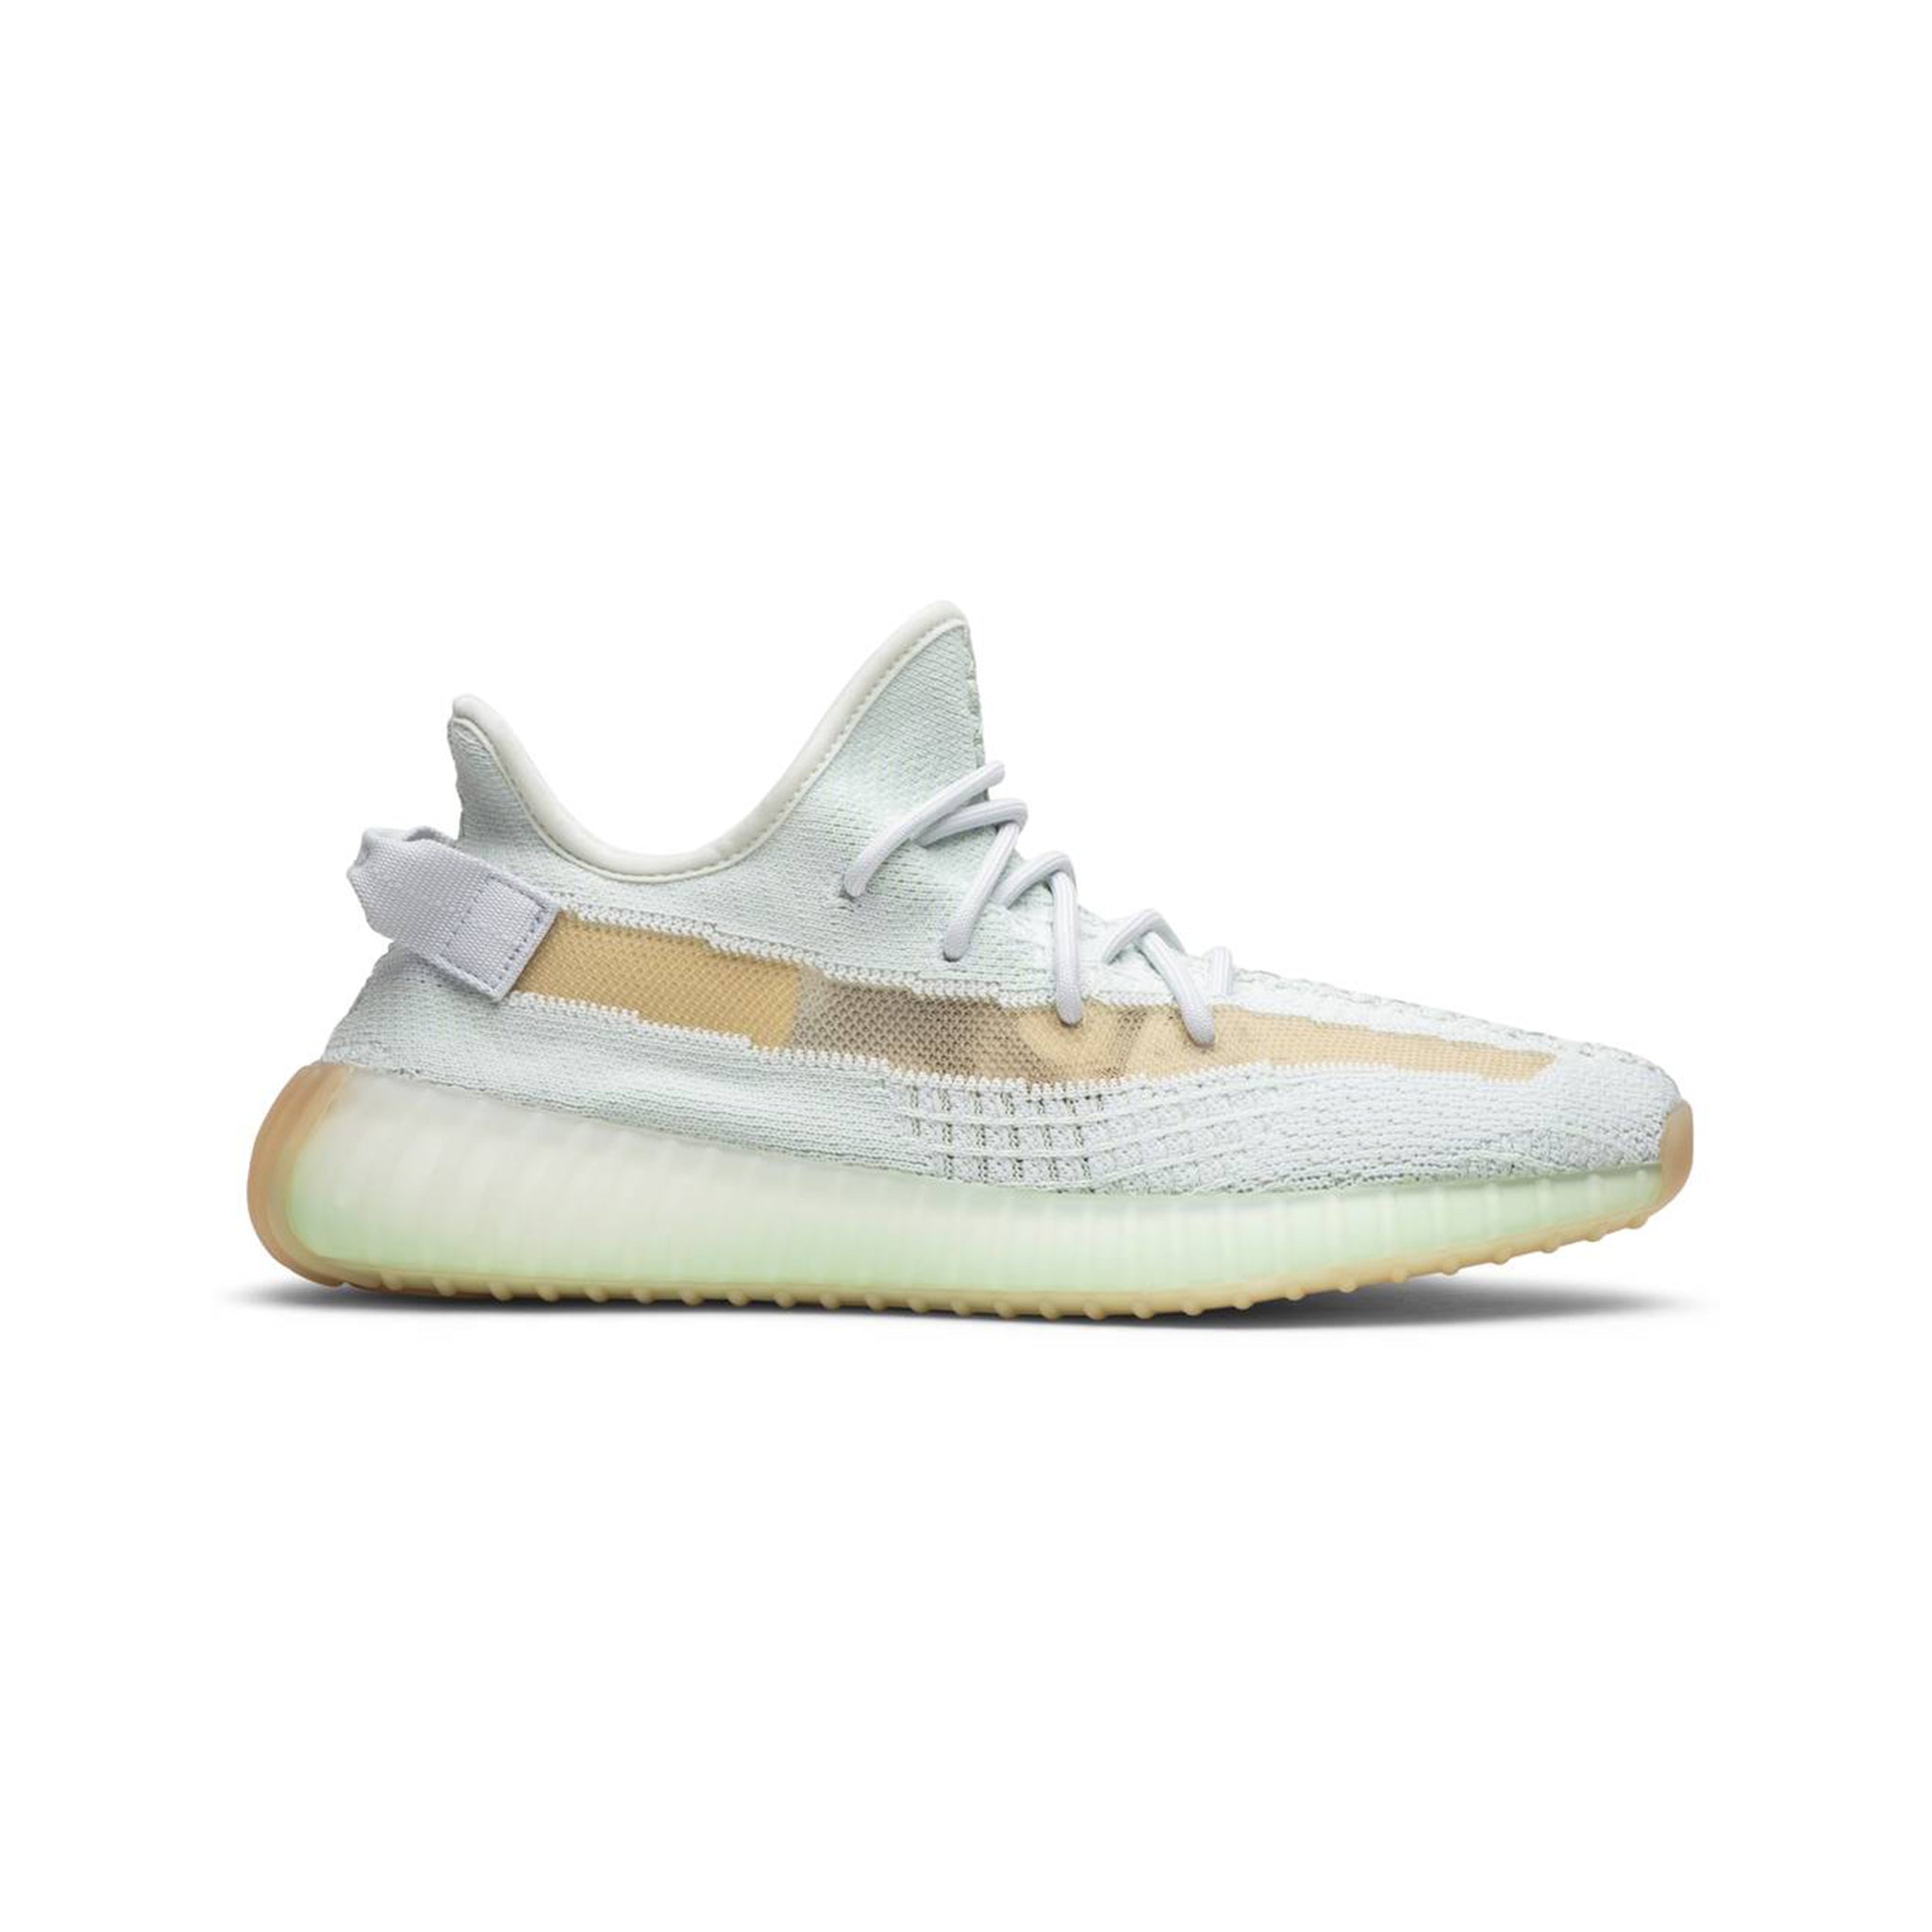 ADIDAS YEEZY BOOST 350 V2 HYPERSPACE (ASIA EXCLUSIVE)